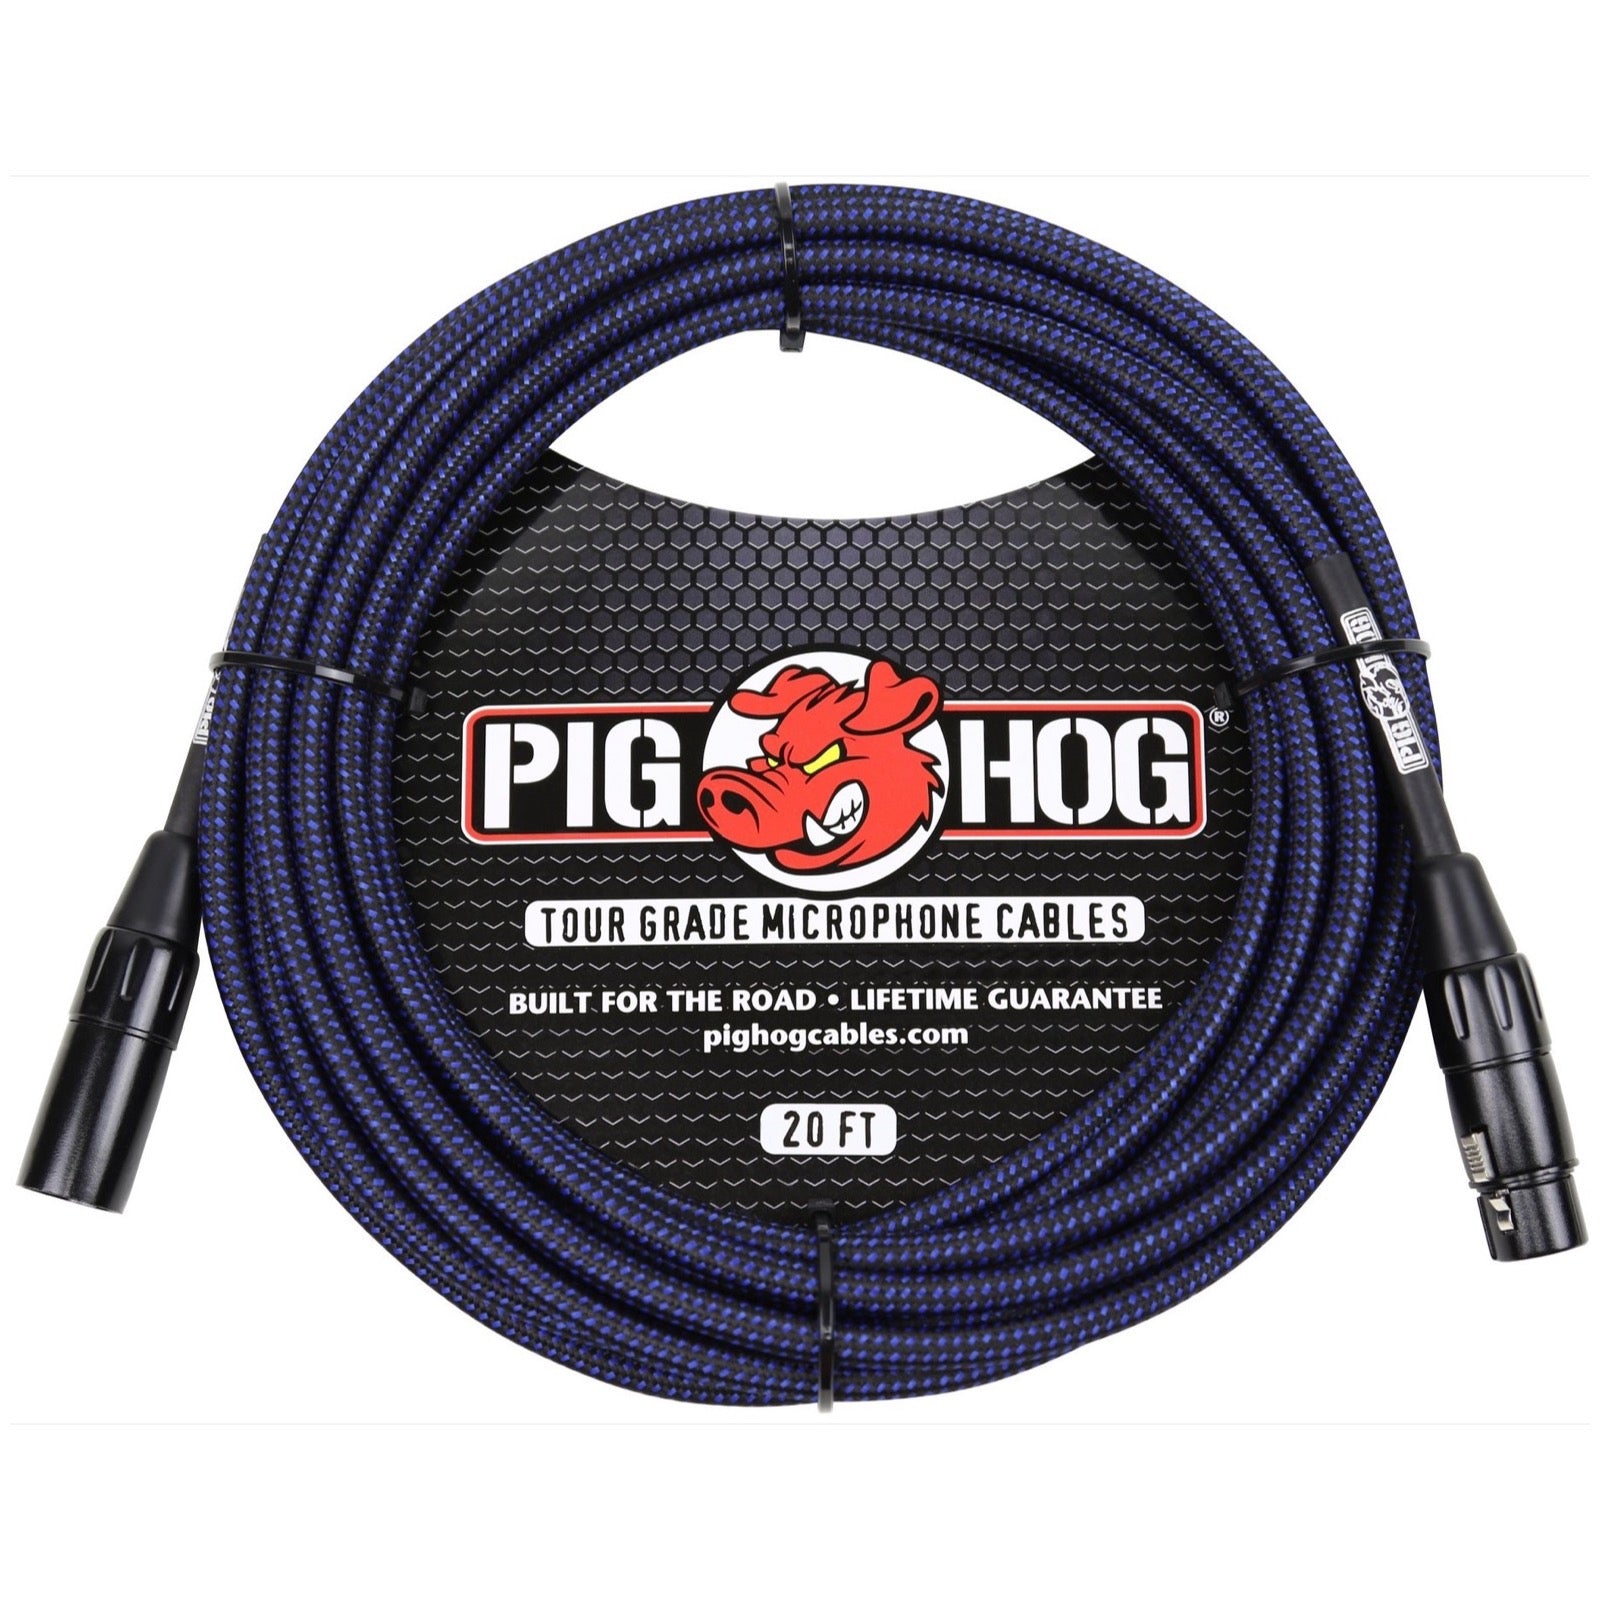 Pig Hog Woven XLR Microphone Cable, Black and Blue, 20 Foot